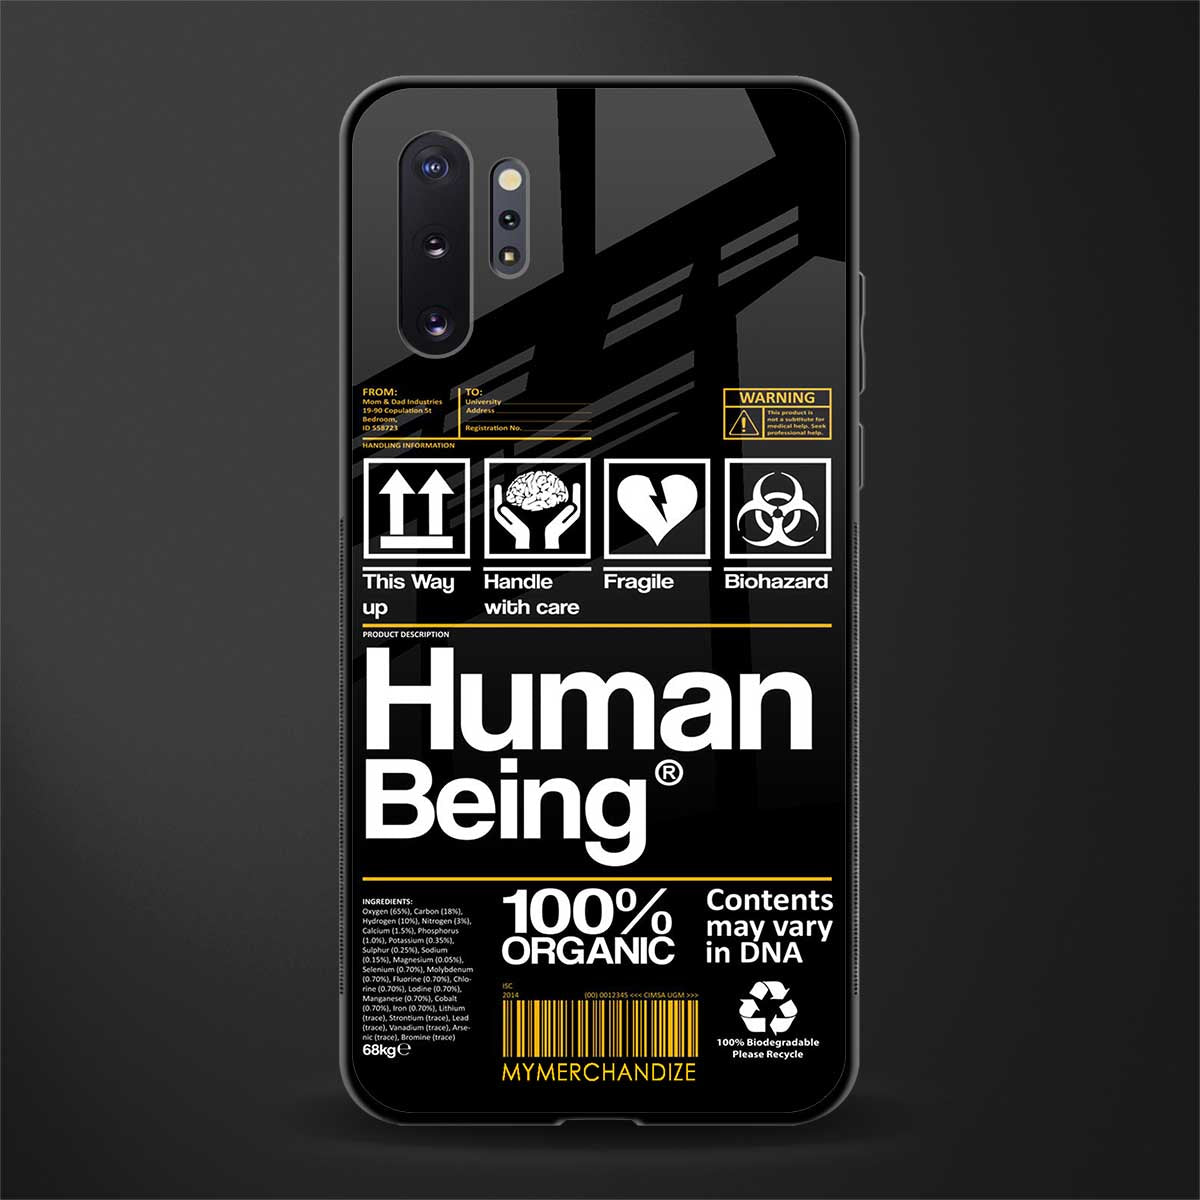 human being label phone cover for samsung galaxy note 10 plus